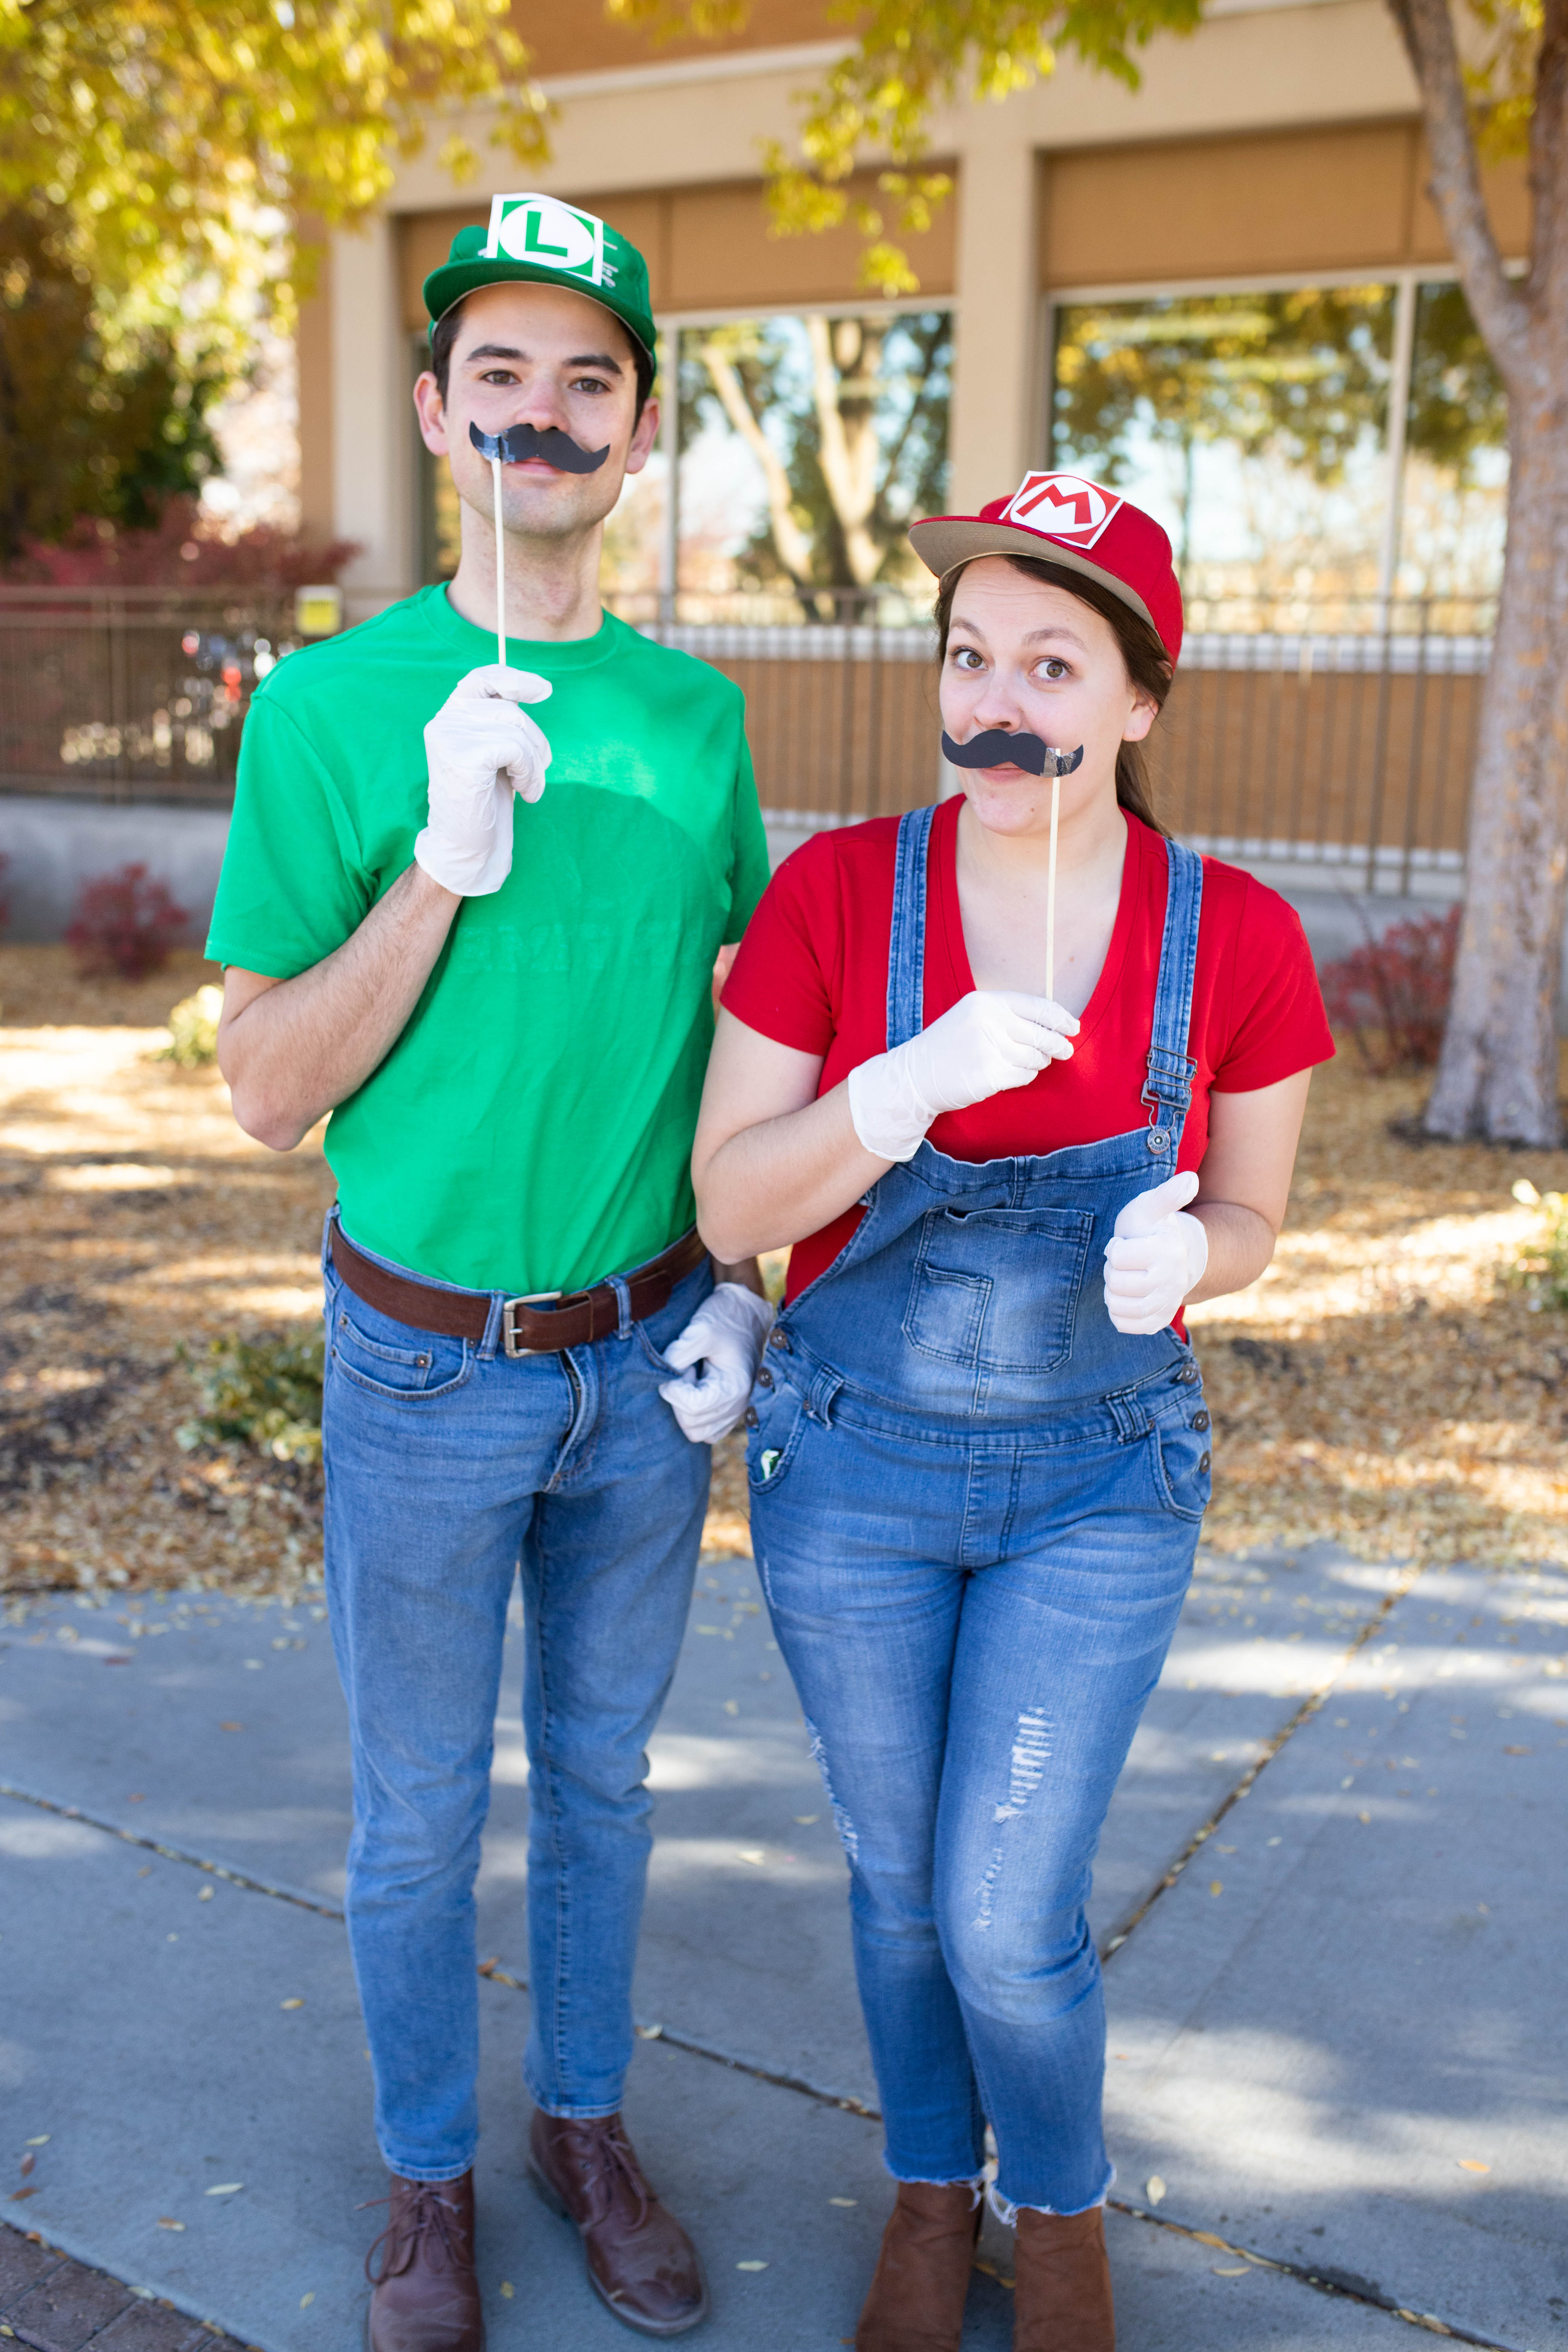 Costumes transform BYU campus on Halloween - The Daily Universe